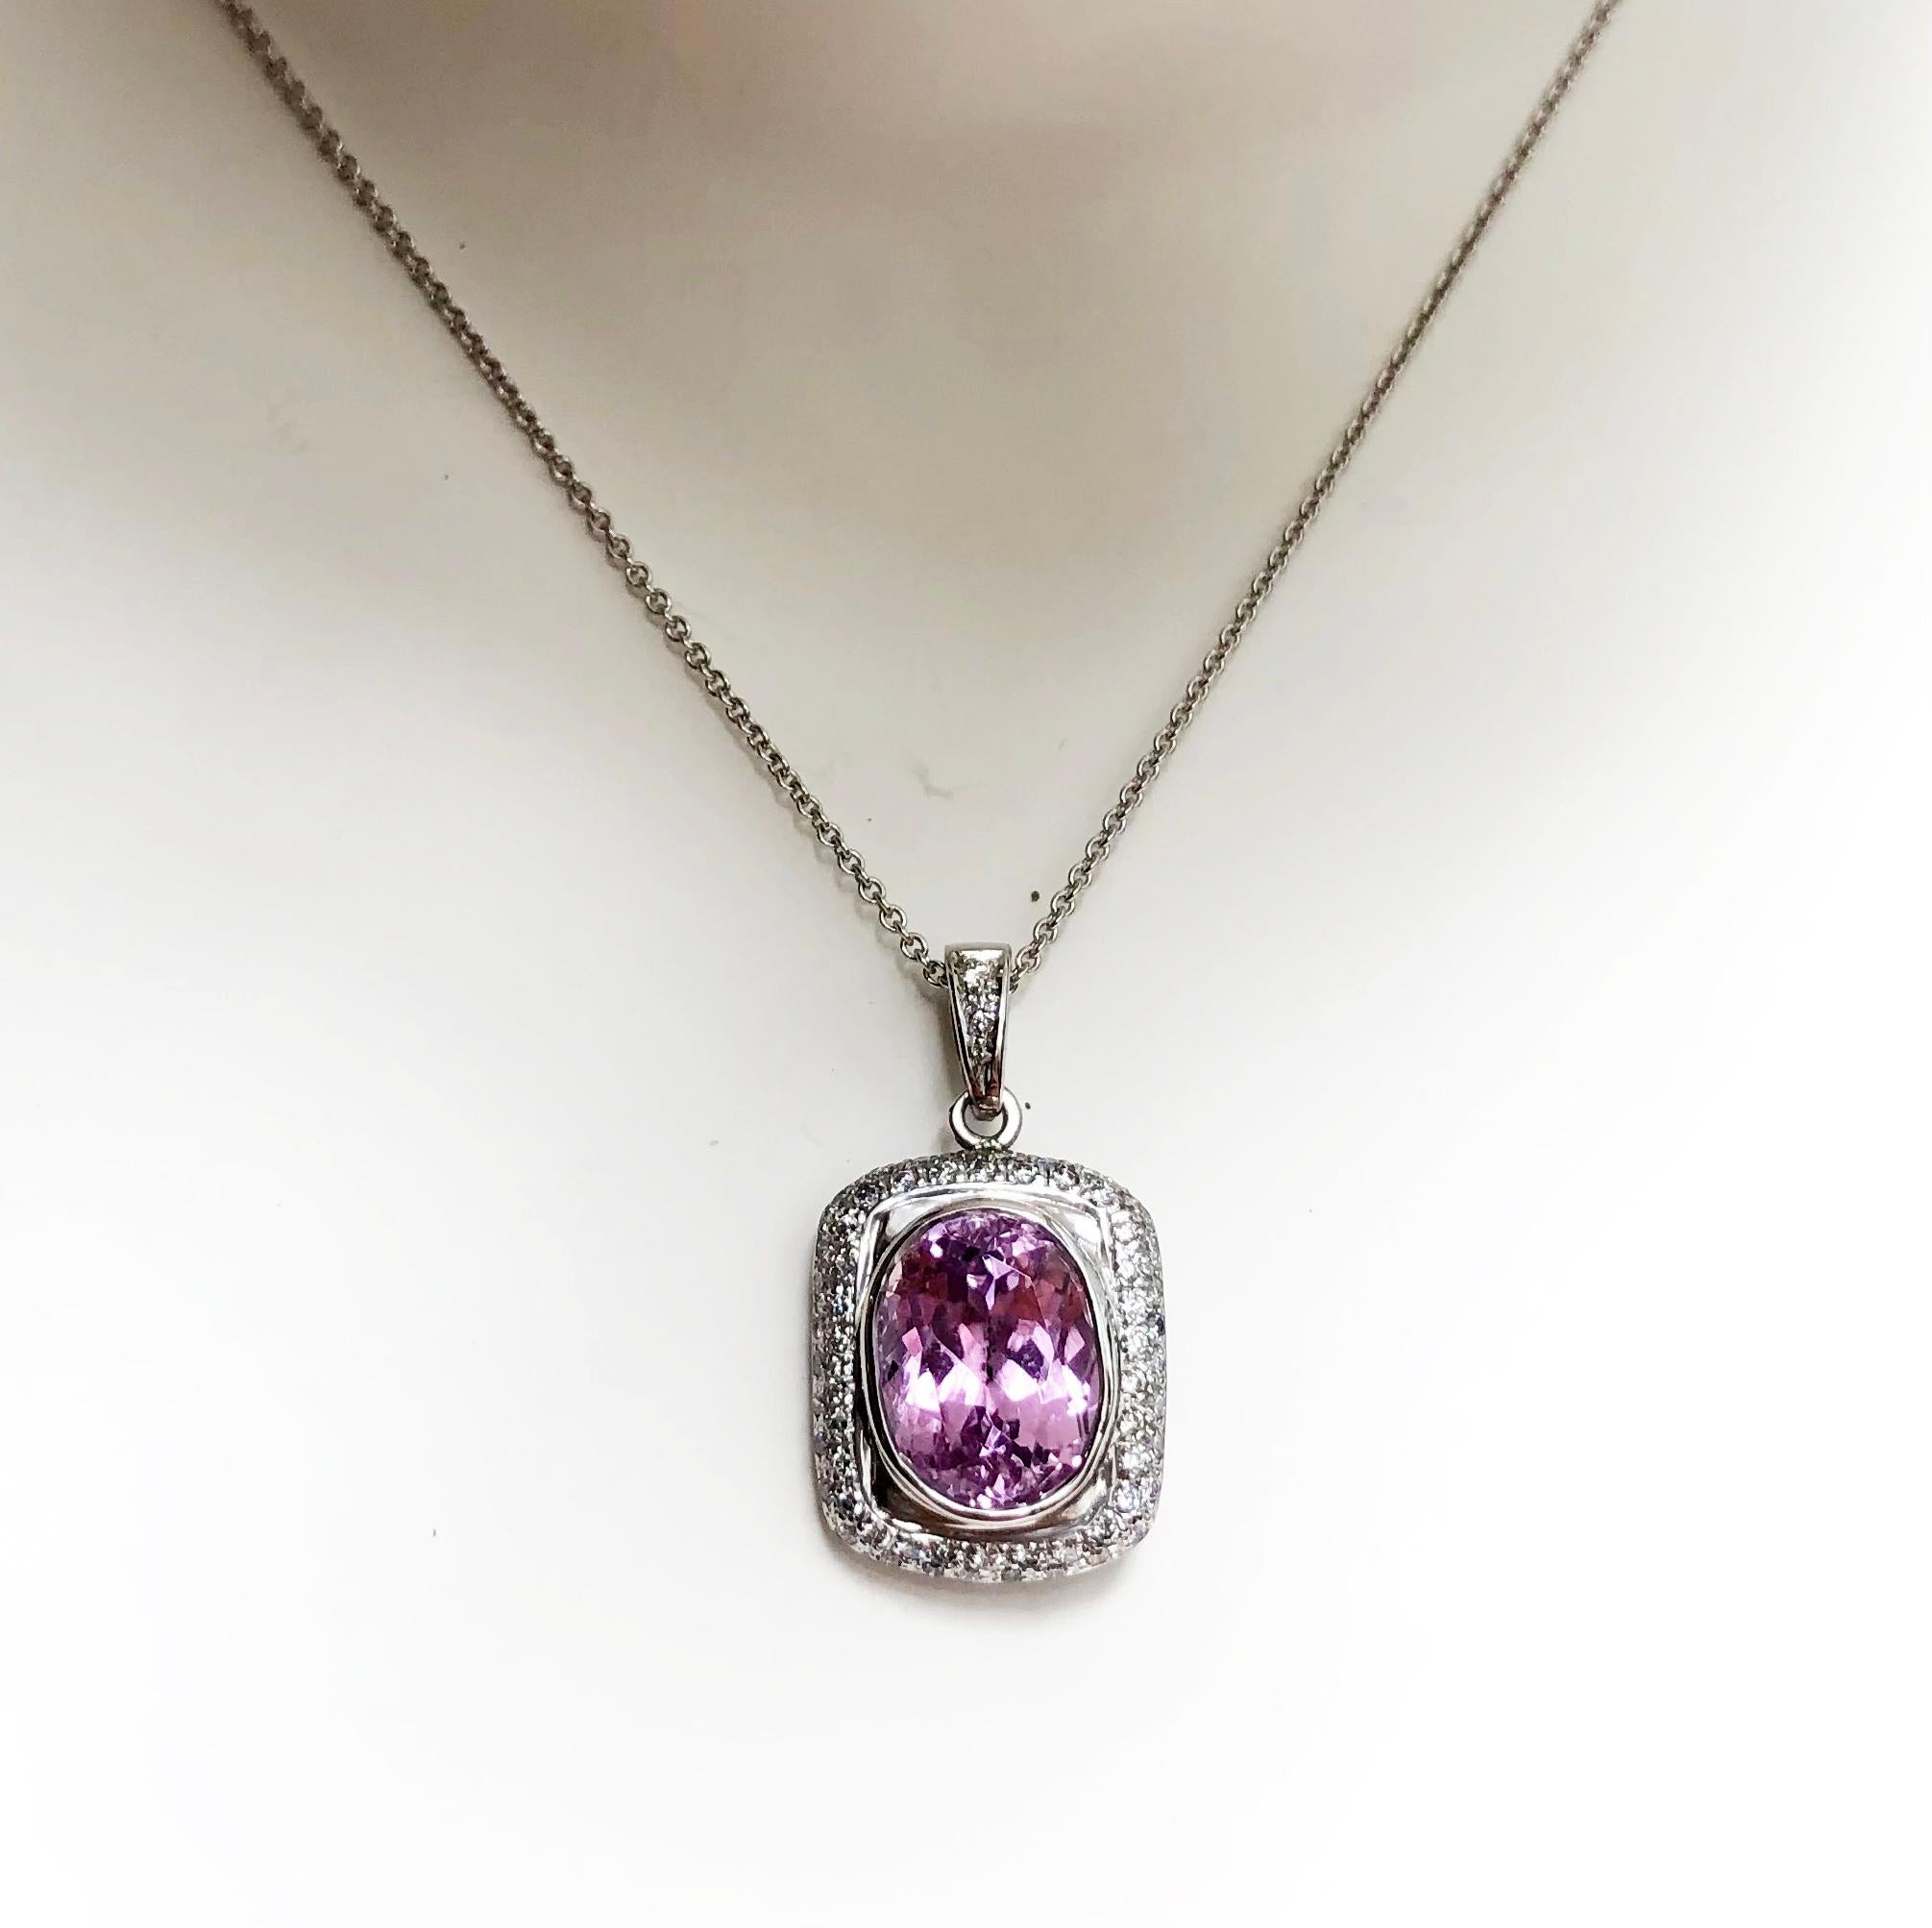 Kunzite 14.57 carats with Diamond 0.54 carat Pendant set in 18 Karat White Gold Settings
(chain not included)

Width:  1.5 cm 
Length: 2.8 cm
Total Weight: 5.74 grams

